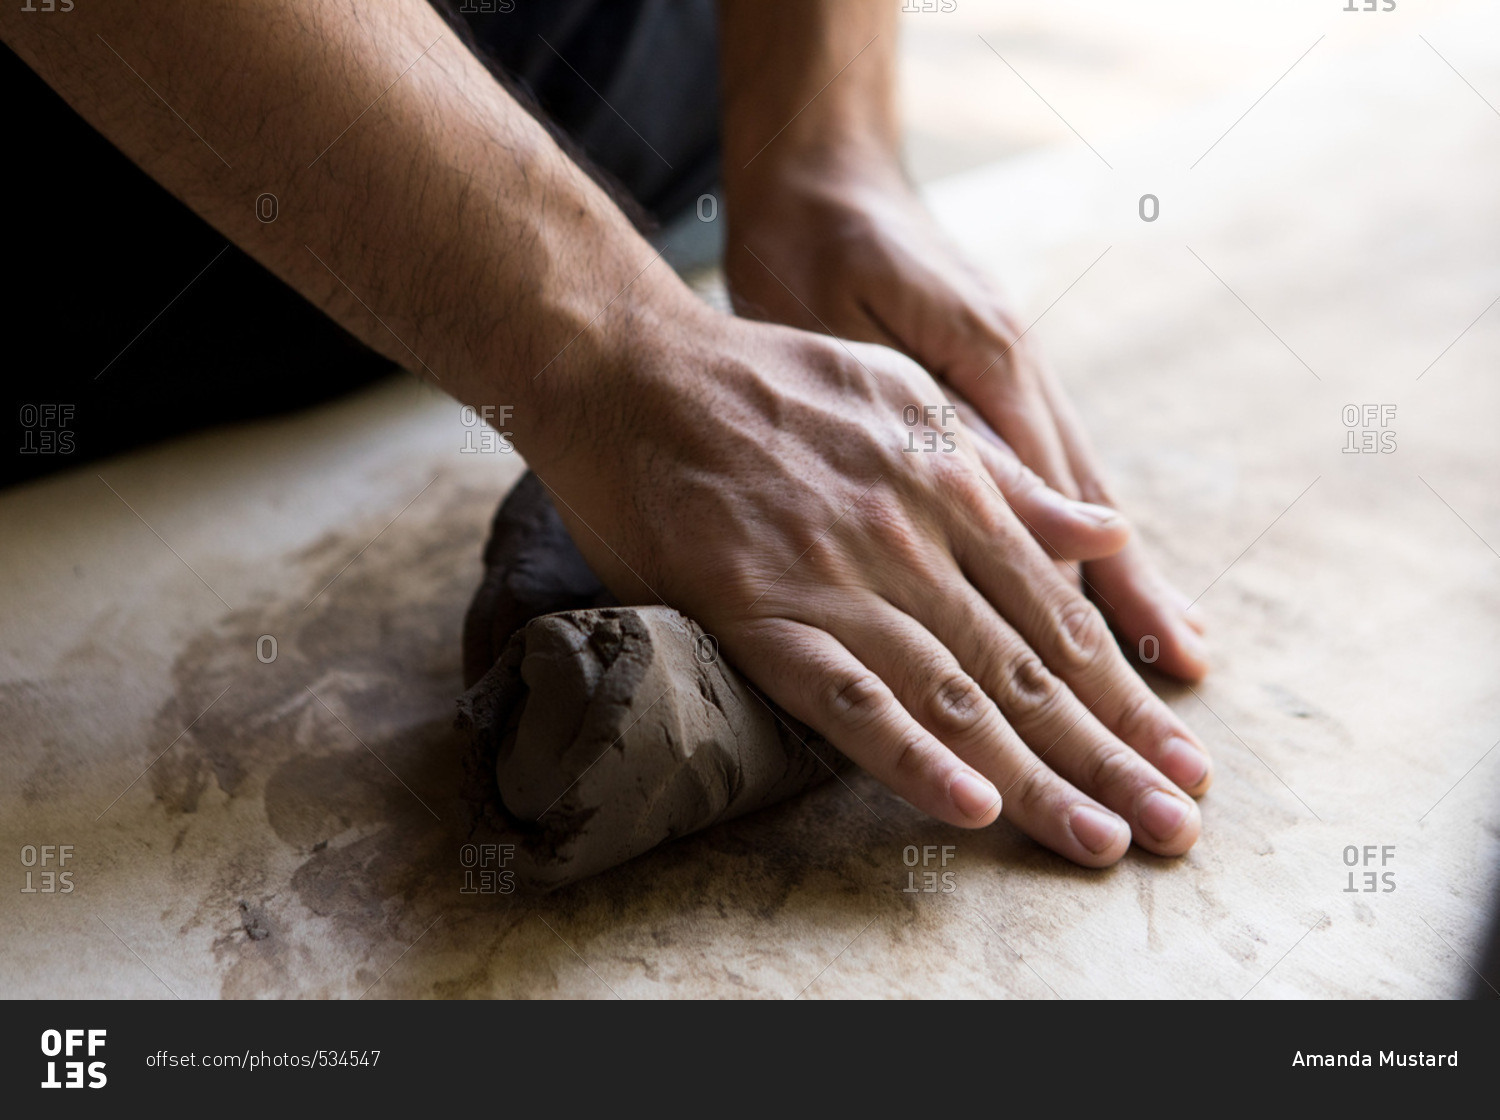 Hands molding clay in a pottery and ceramic studio in Chiang Mai, Thailand  stock photo - OFFSET